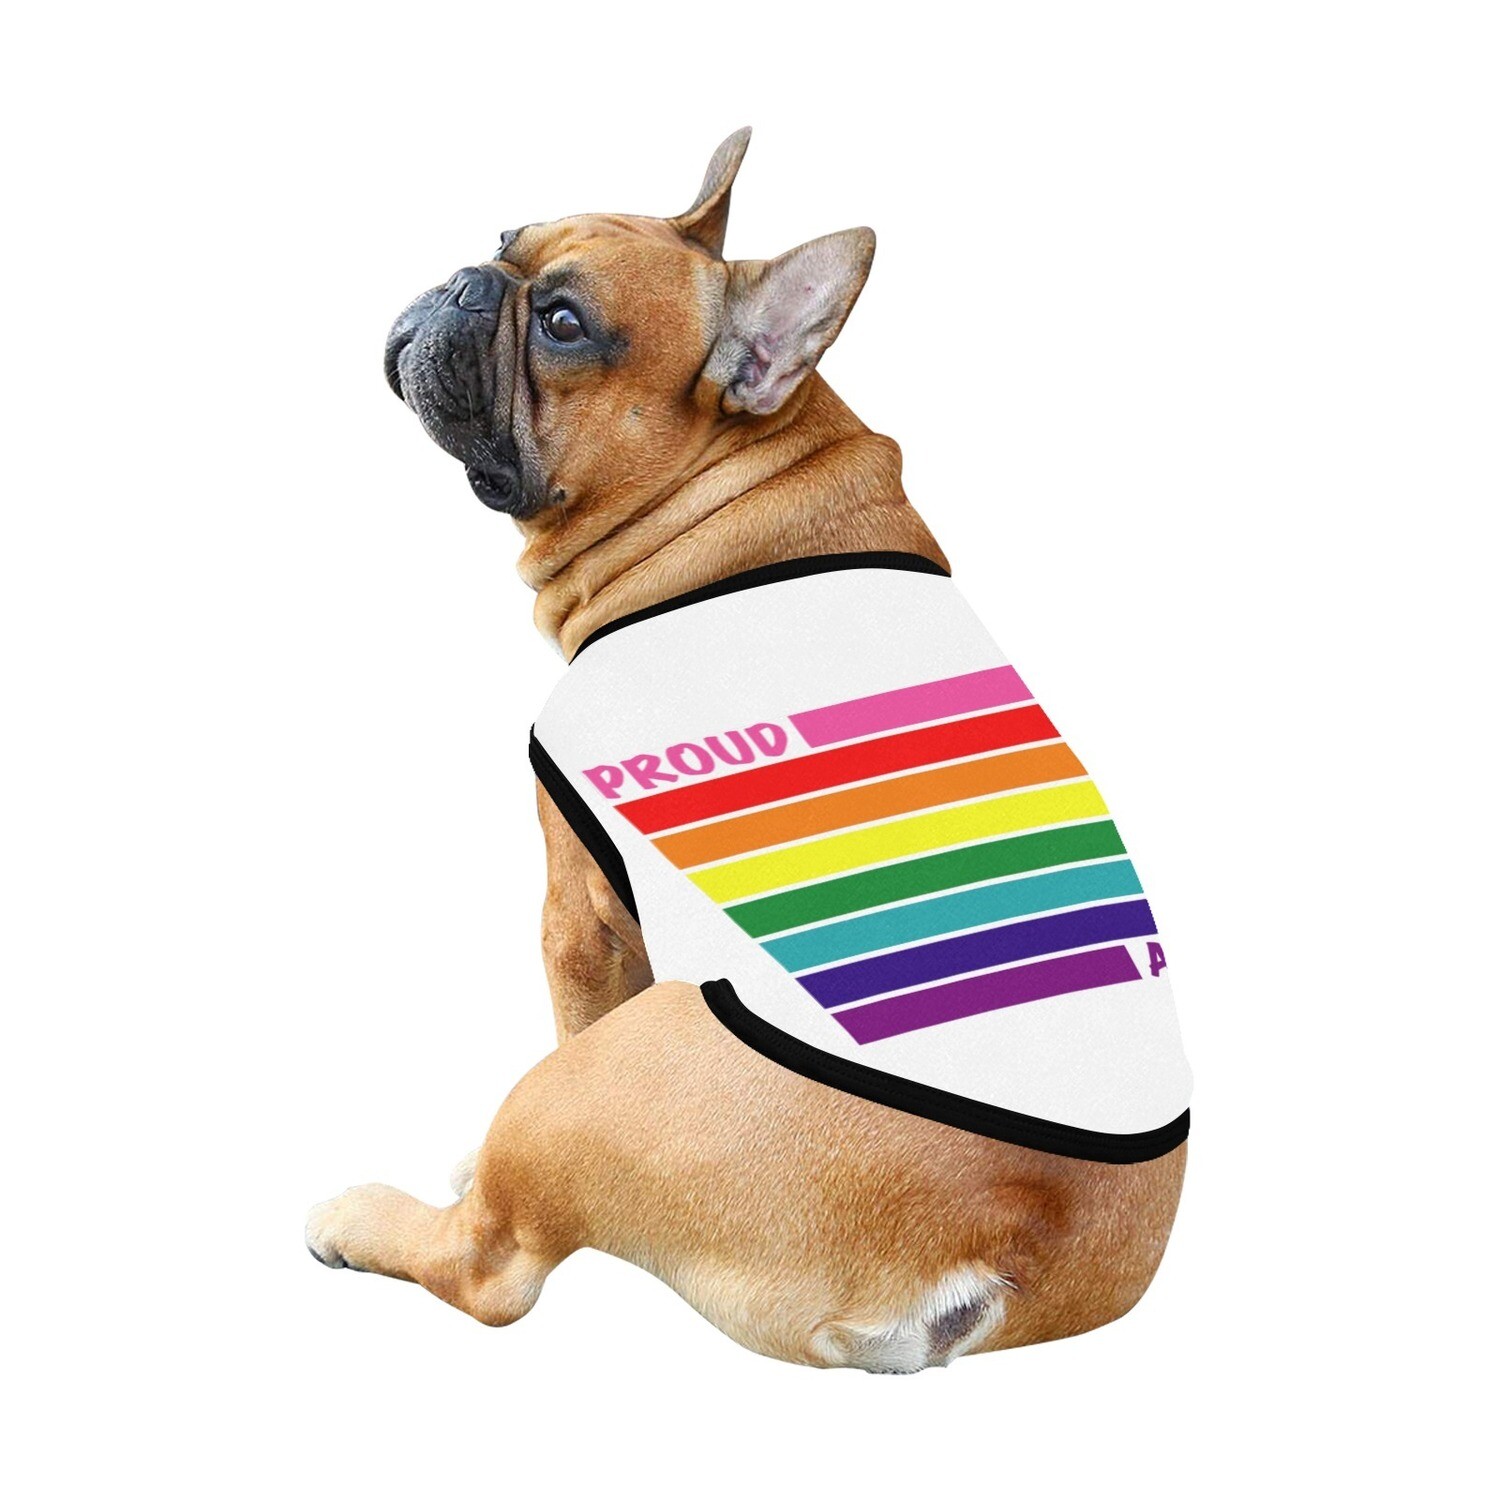 🐕🏳️‍🌈 Love is Love LGBTQProud Ally, Dog Tank Top, Dog shirt, Dog t-shirt, Dog clothes, Dog clothing, 7 sizes XS to 3XL, LGBT, Dog gift, Gift for dogs, pride flag, rainbow flag